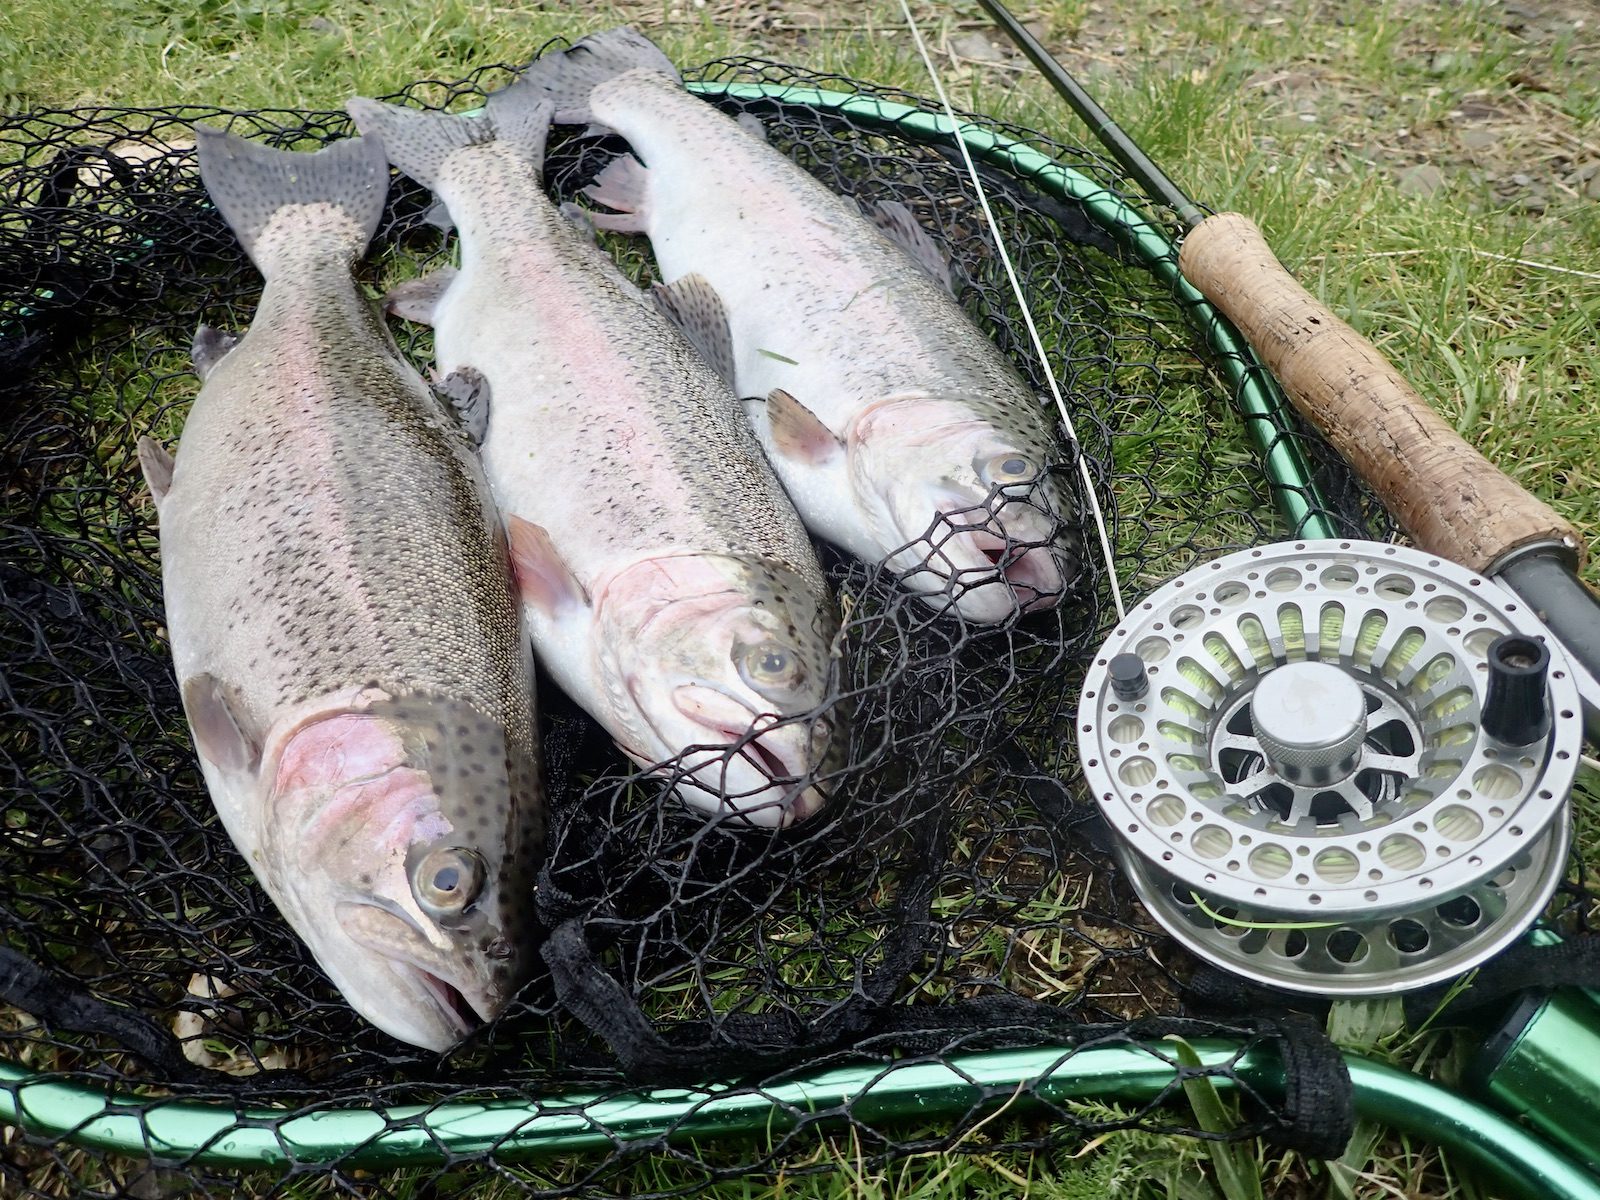 Bulldog Fishery Archives - North Devon & Exmoor Angling News - The